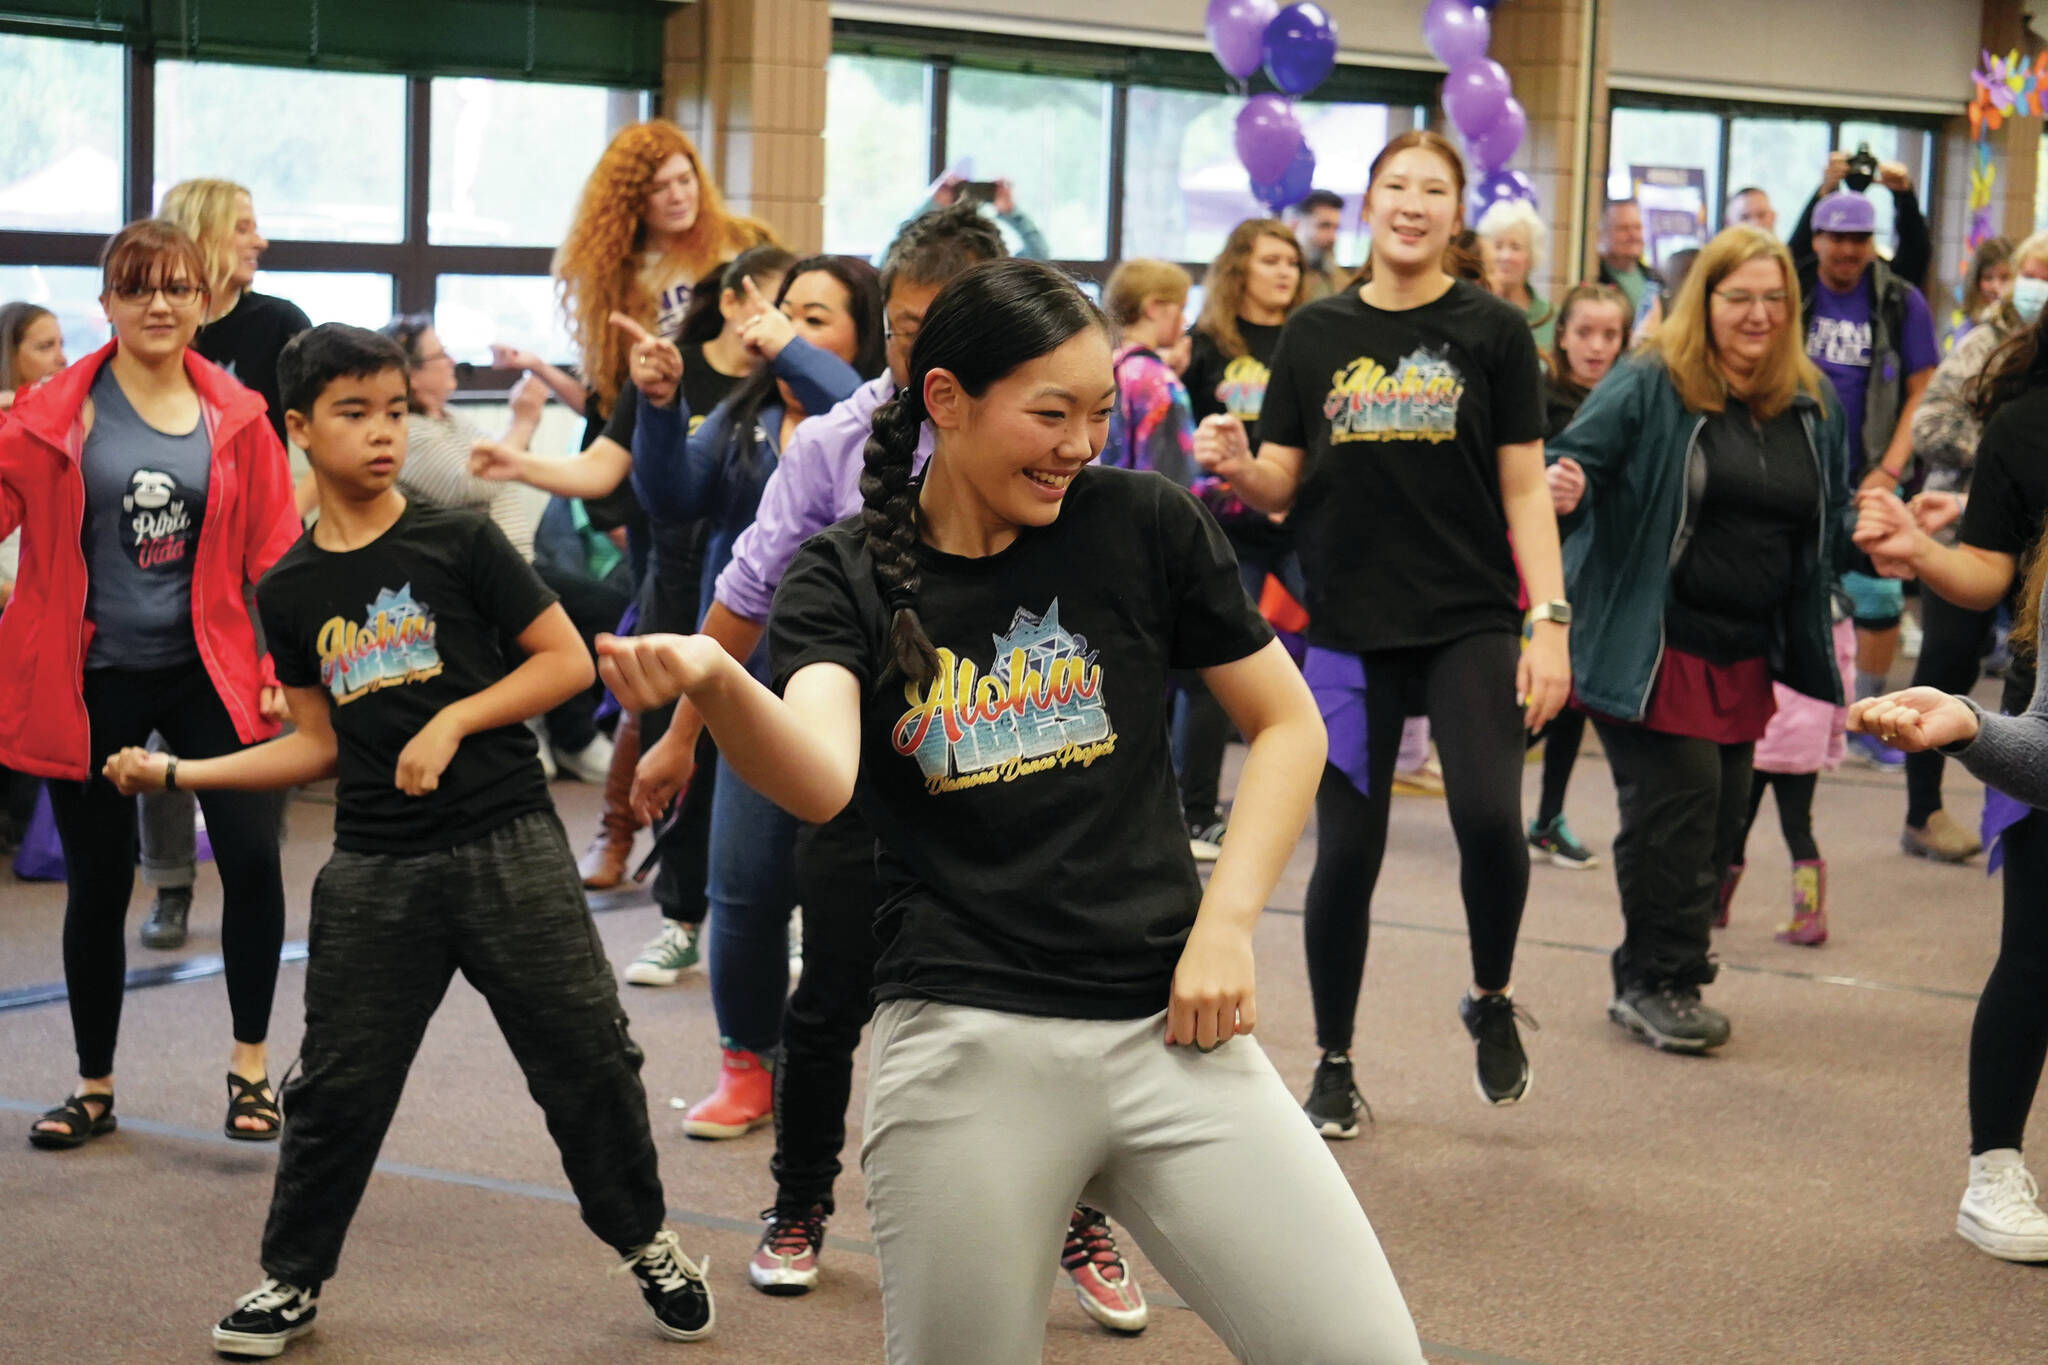 Jake Dye/Peninsula Clarion
Dancers from the Diamond Dance Project perform ahead of the Walk to End Alzheimer’s at the Soldotna Regional Sports Complex in Soldotna on Saturday.